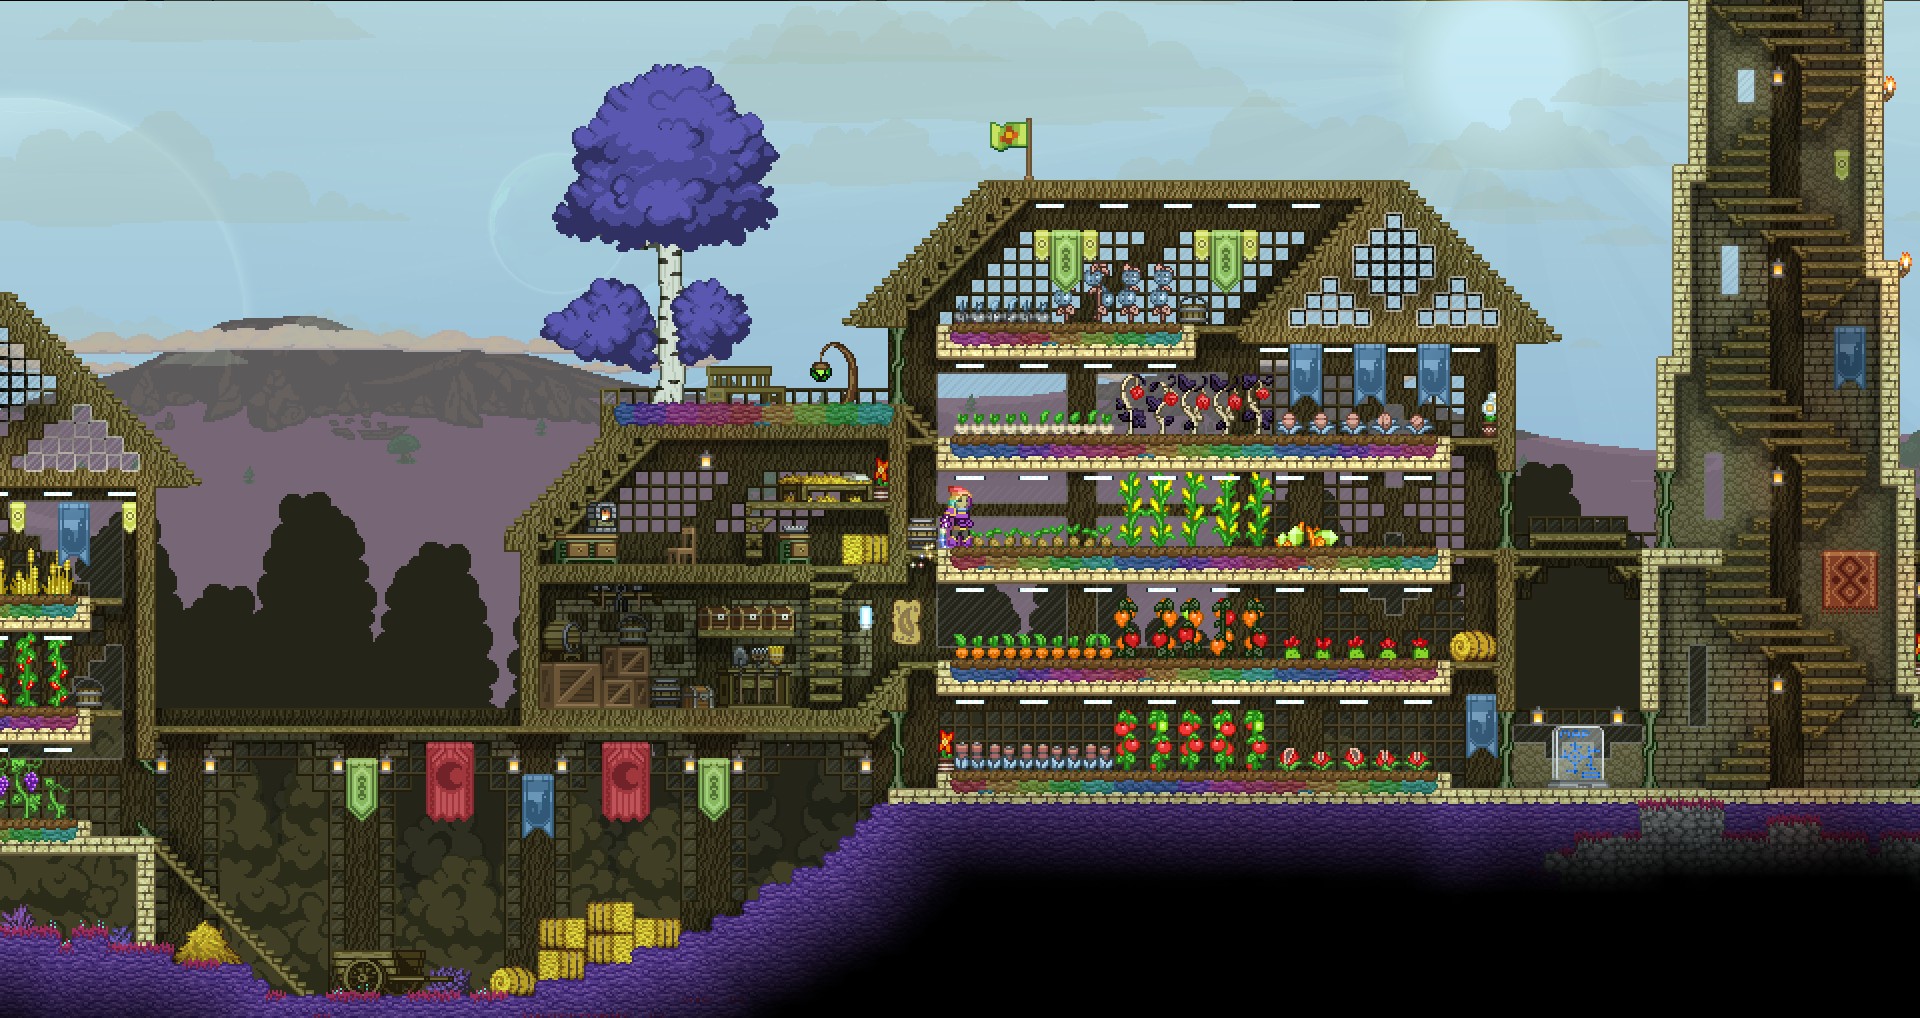 Starbound Backgrounds, Compatible - PC, Mobile, Gadgets| 1920x1018 px